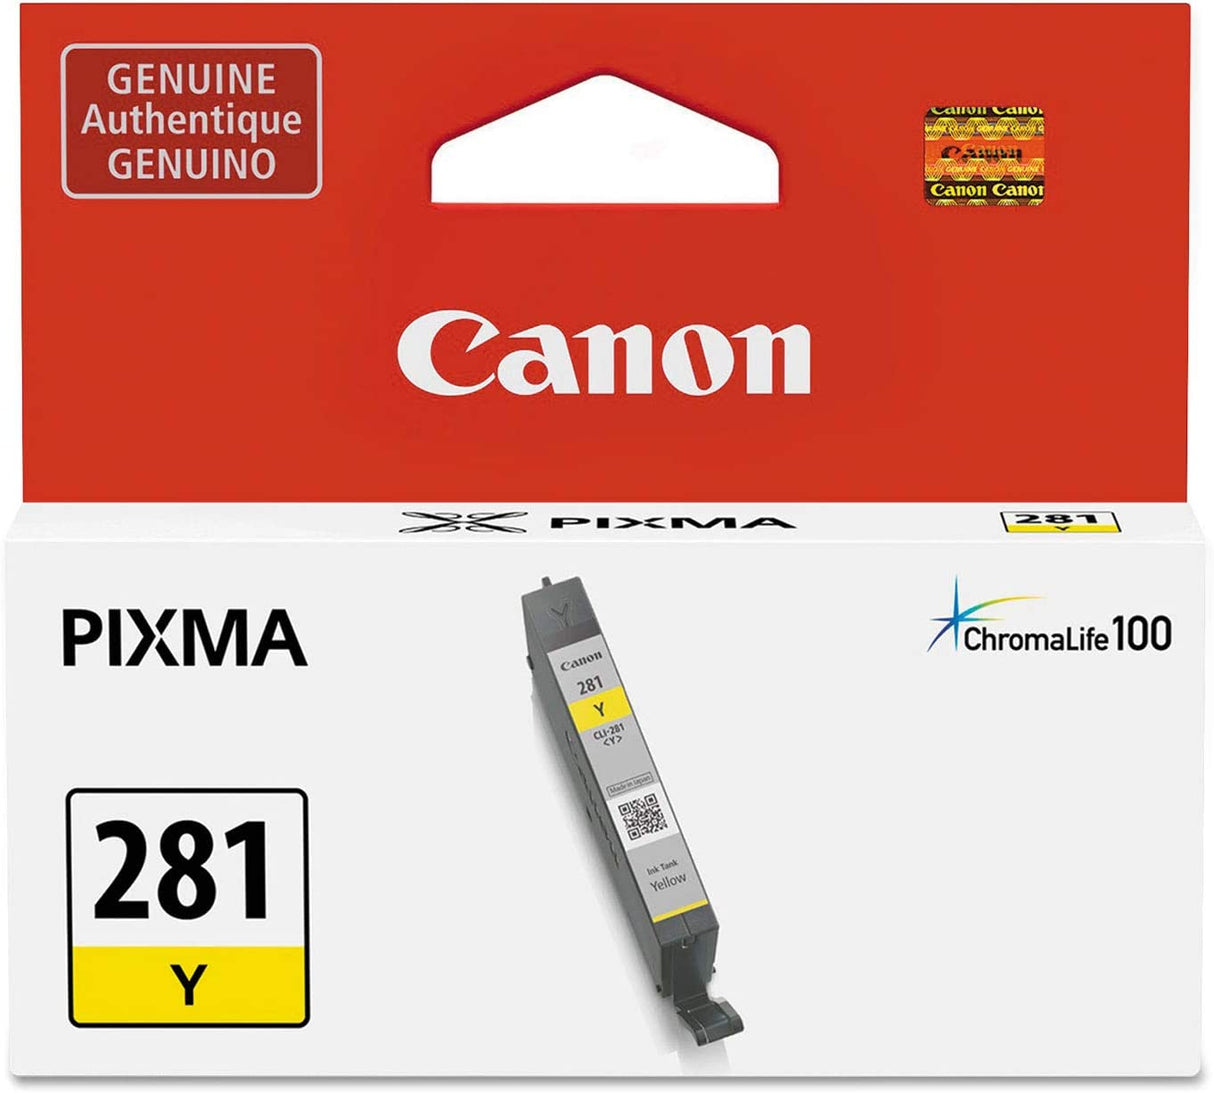 Canon CLI-281 Yellow Ink Tank Compatible to TR8520, TR7520, TS9120 Series,TS8120 Series, TS6120 Series, TS9521C, TS9520, TS8220 Series, TS6220 Series